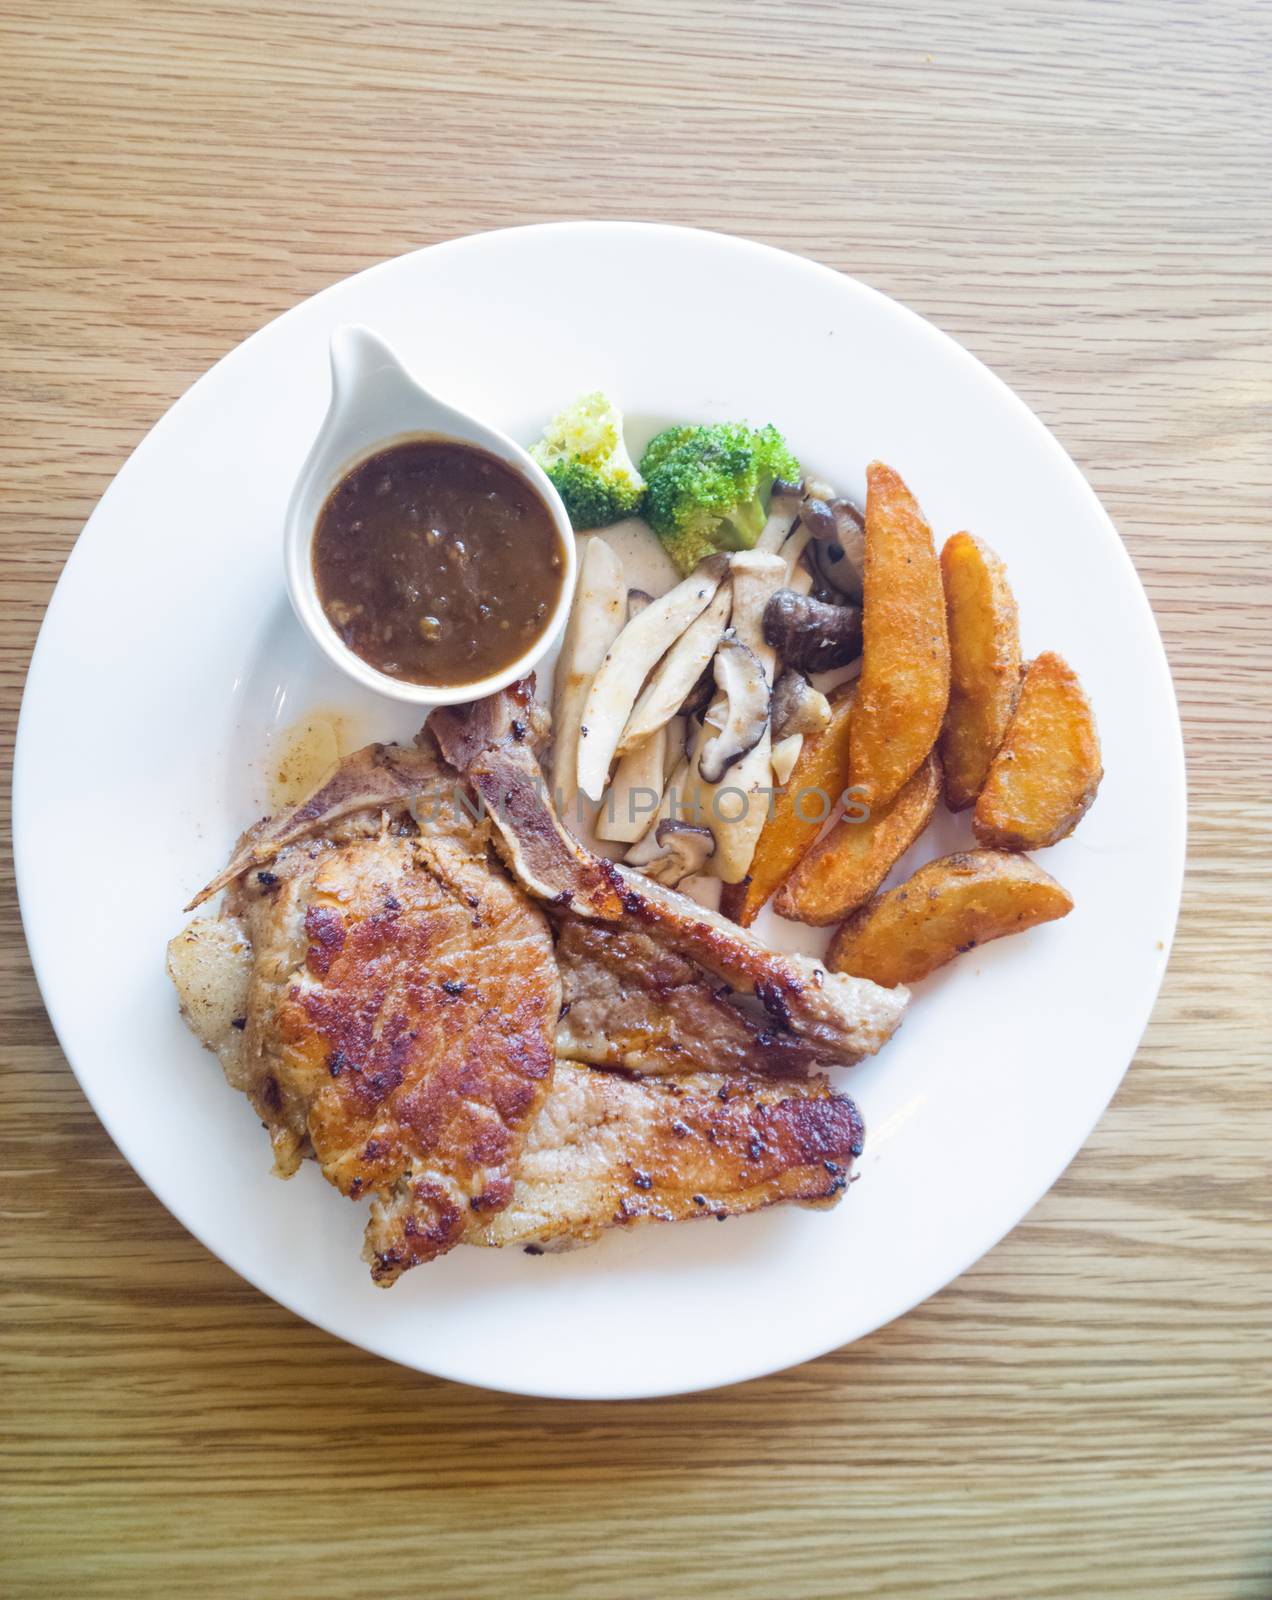 Pork steak with vegetables and french fried by everythingpossible